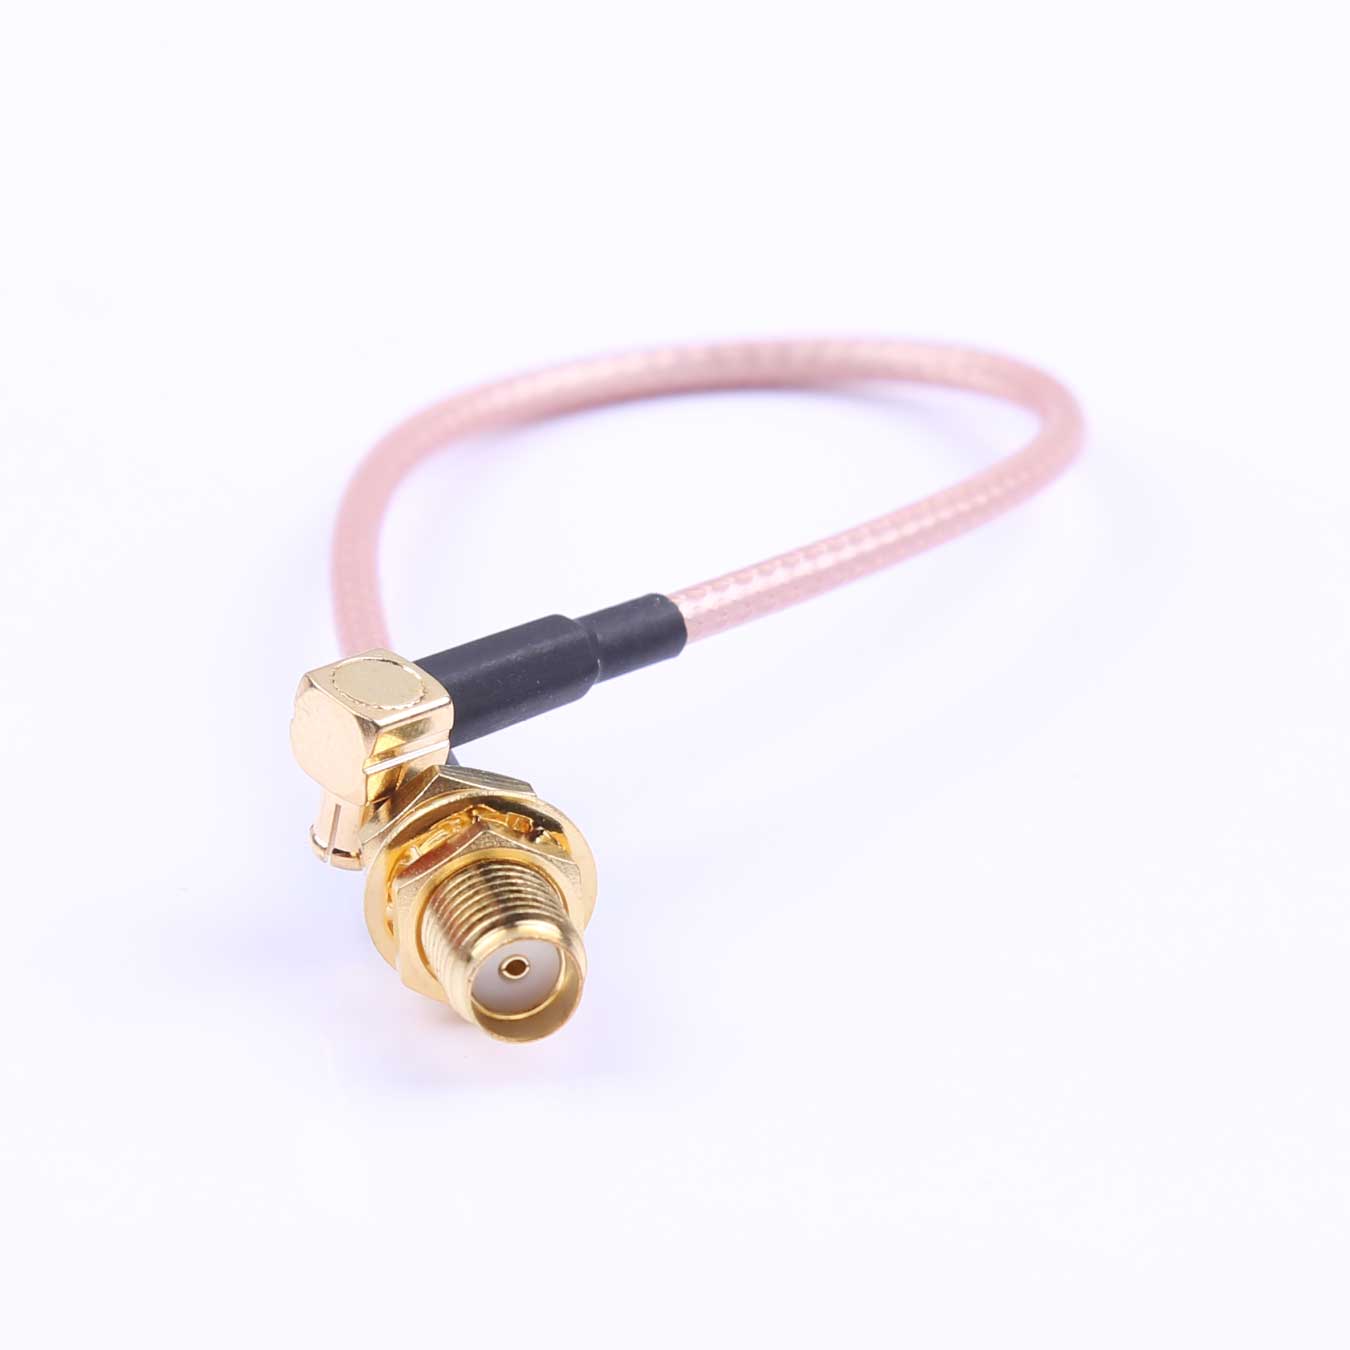 Kinghelm Coaxial connector Rotor RF, mcx to SMA gold-plated external thread hole, RG316, L 150mm (four-piece set) - KHB (RG316) -MCX-150-28